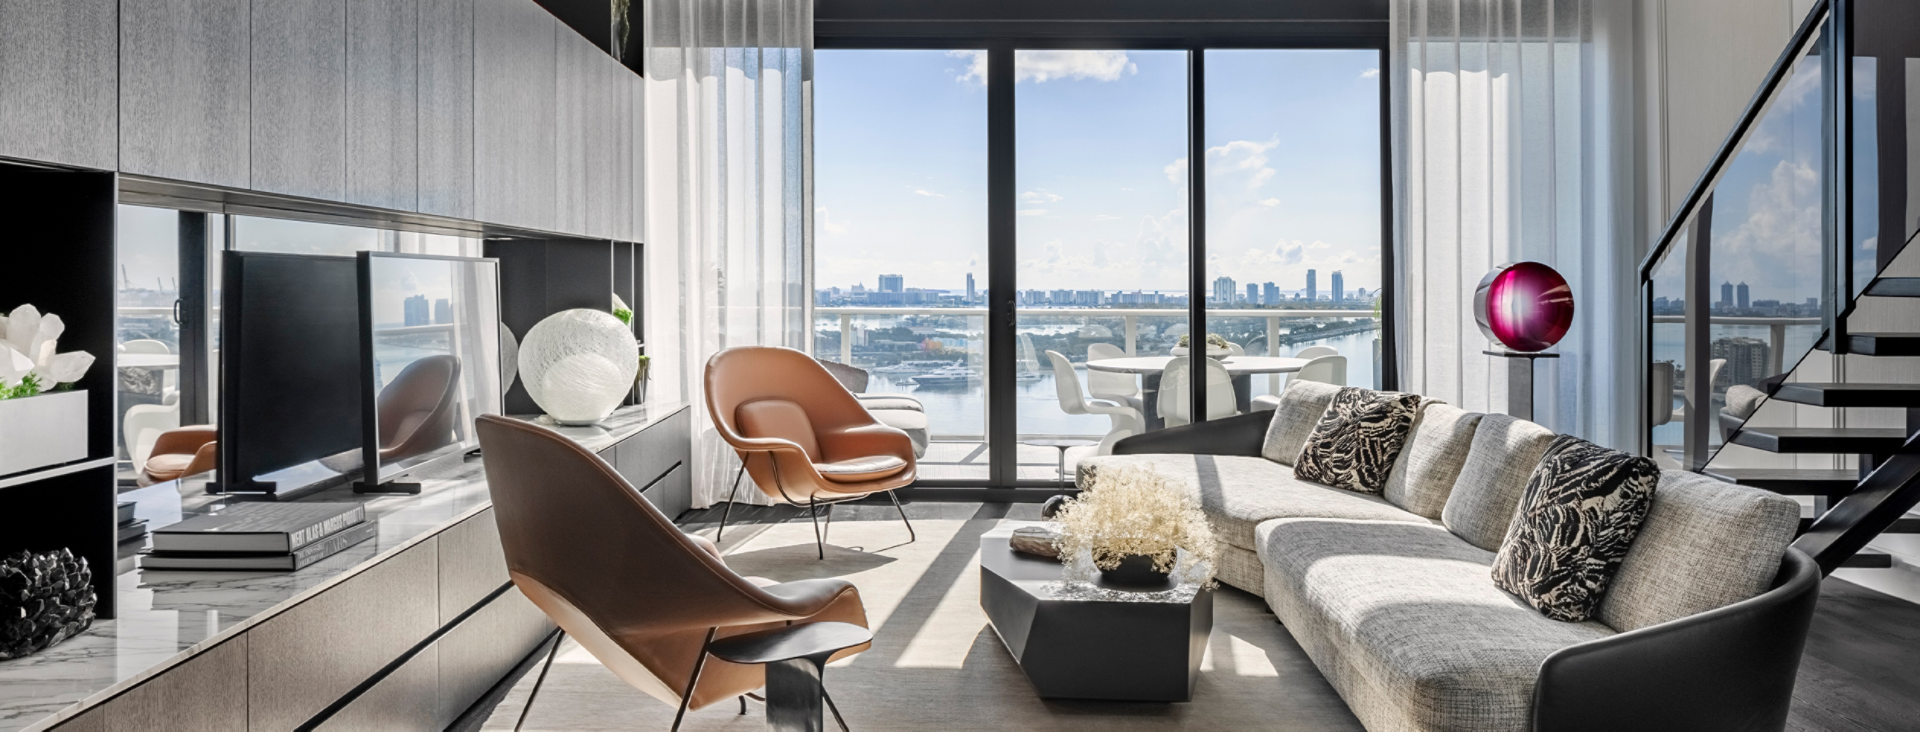 Modern urban loft living area with postmodern sectional and twin leather armchairs in front of flat screen TV with a view to an outside balcony area overlooking a city skyline.